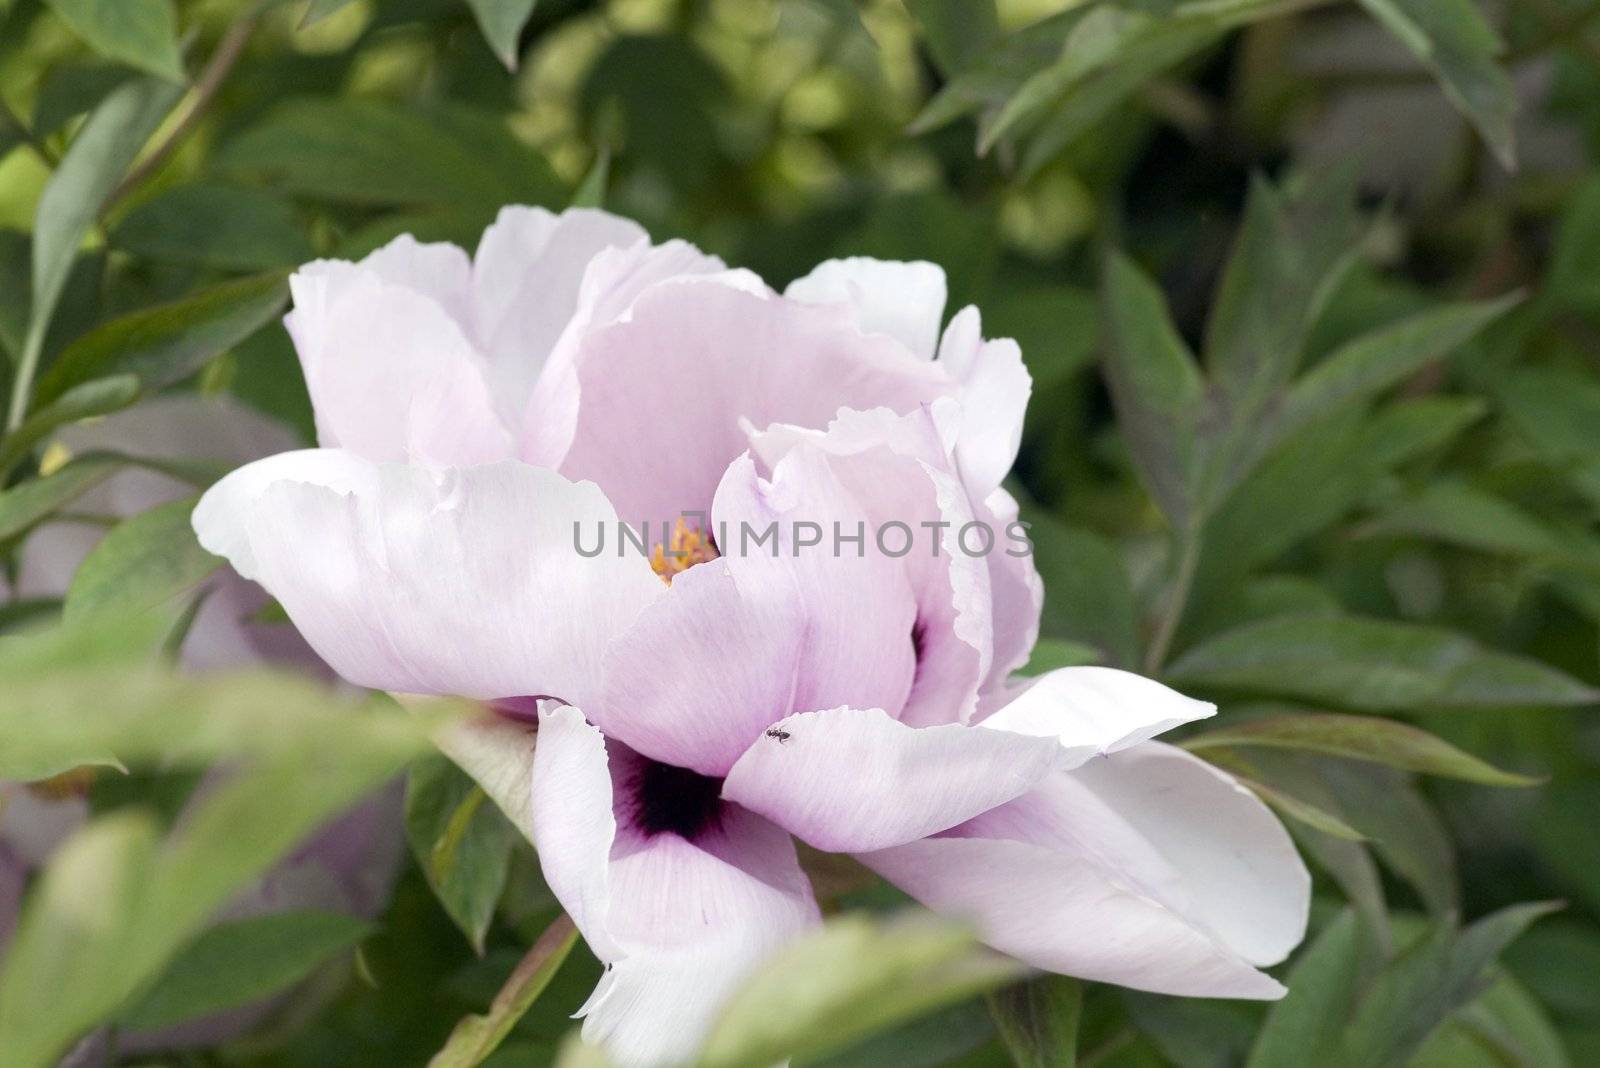 rose Peony on green background

